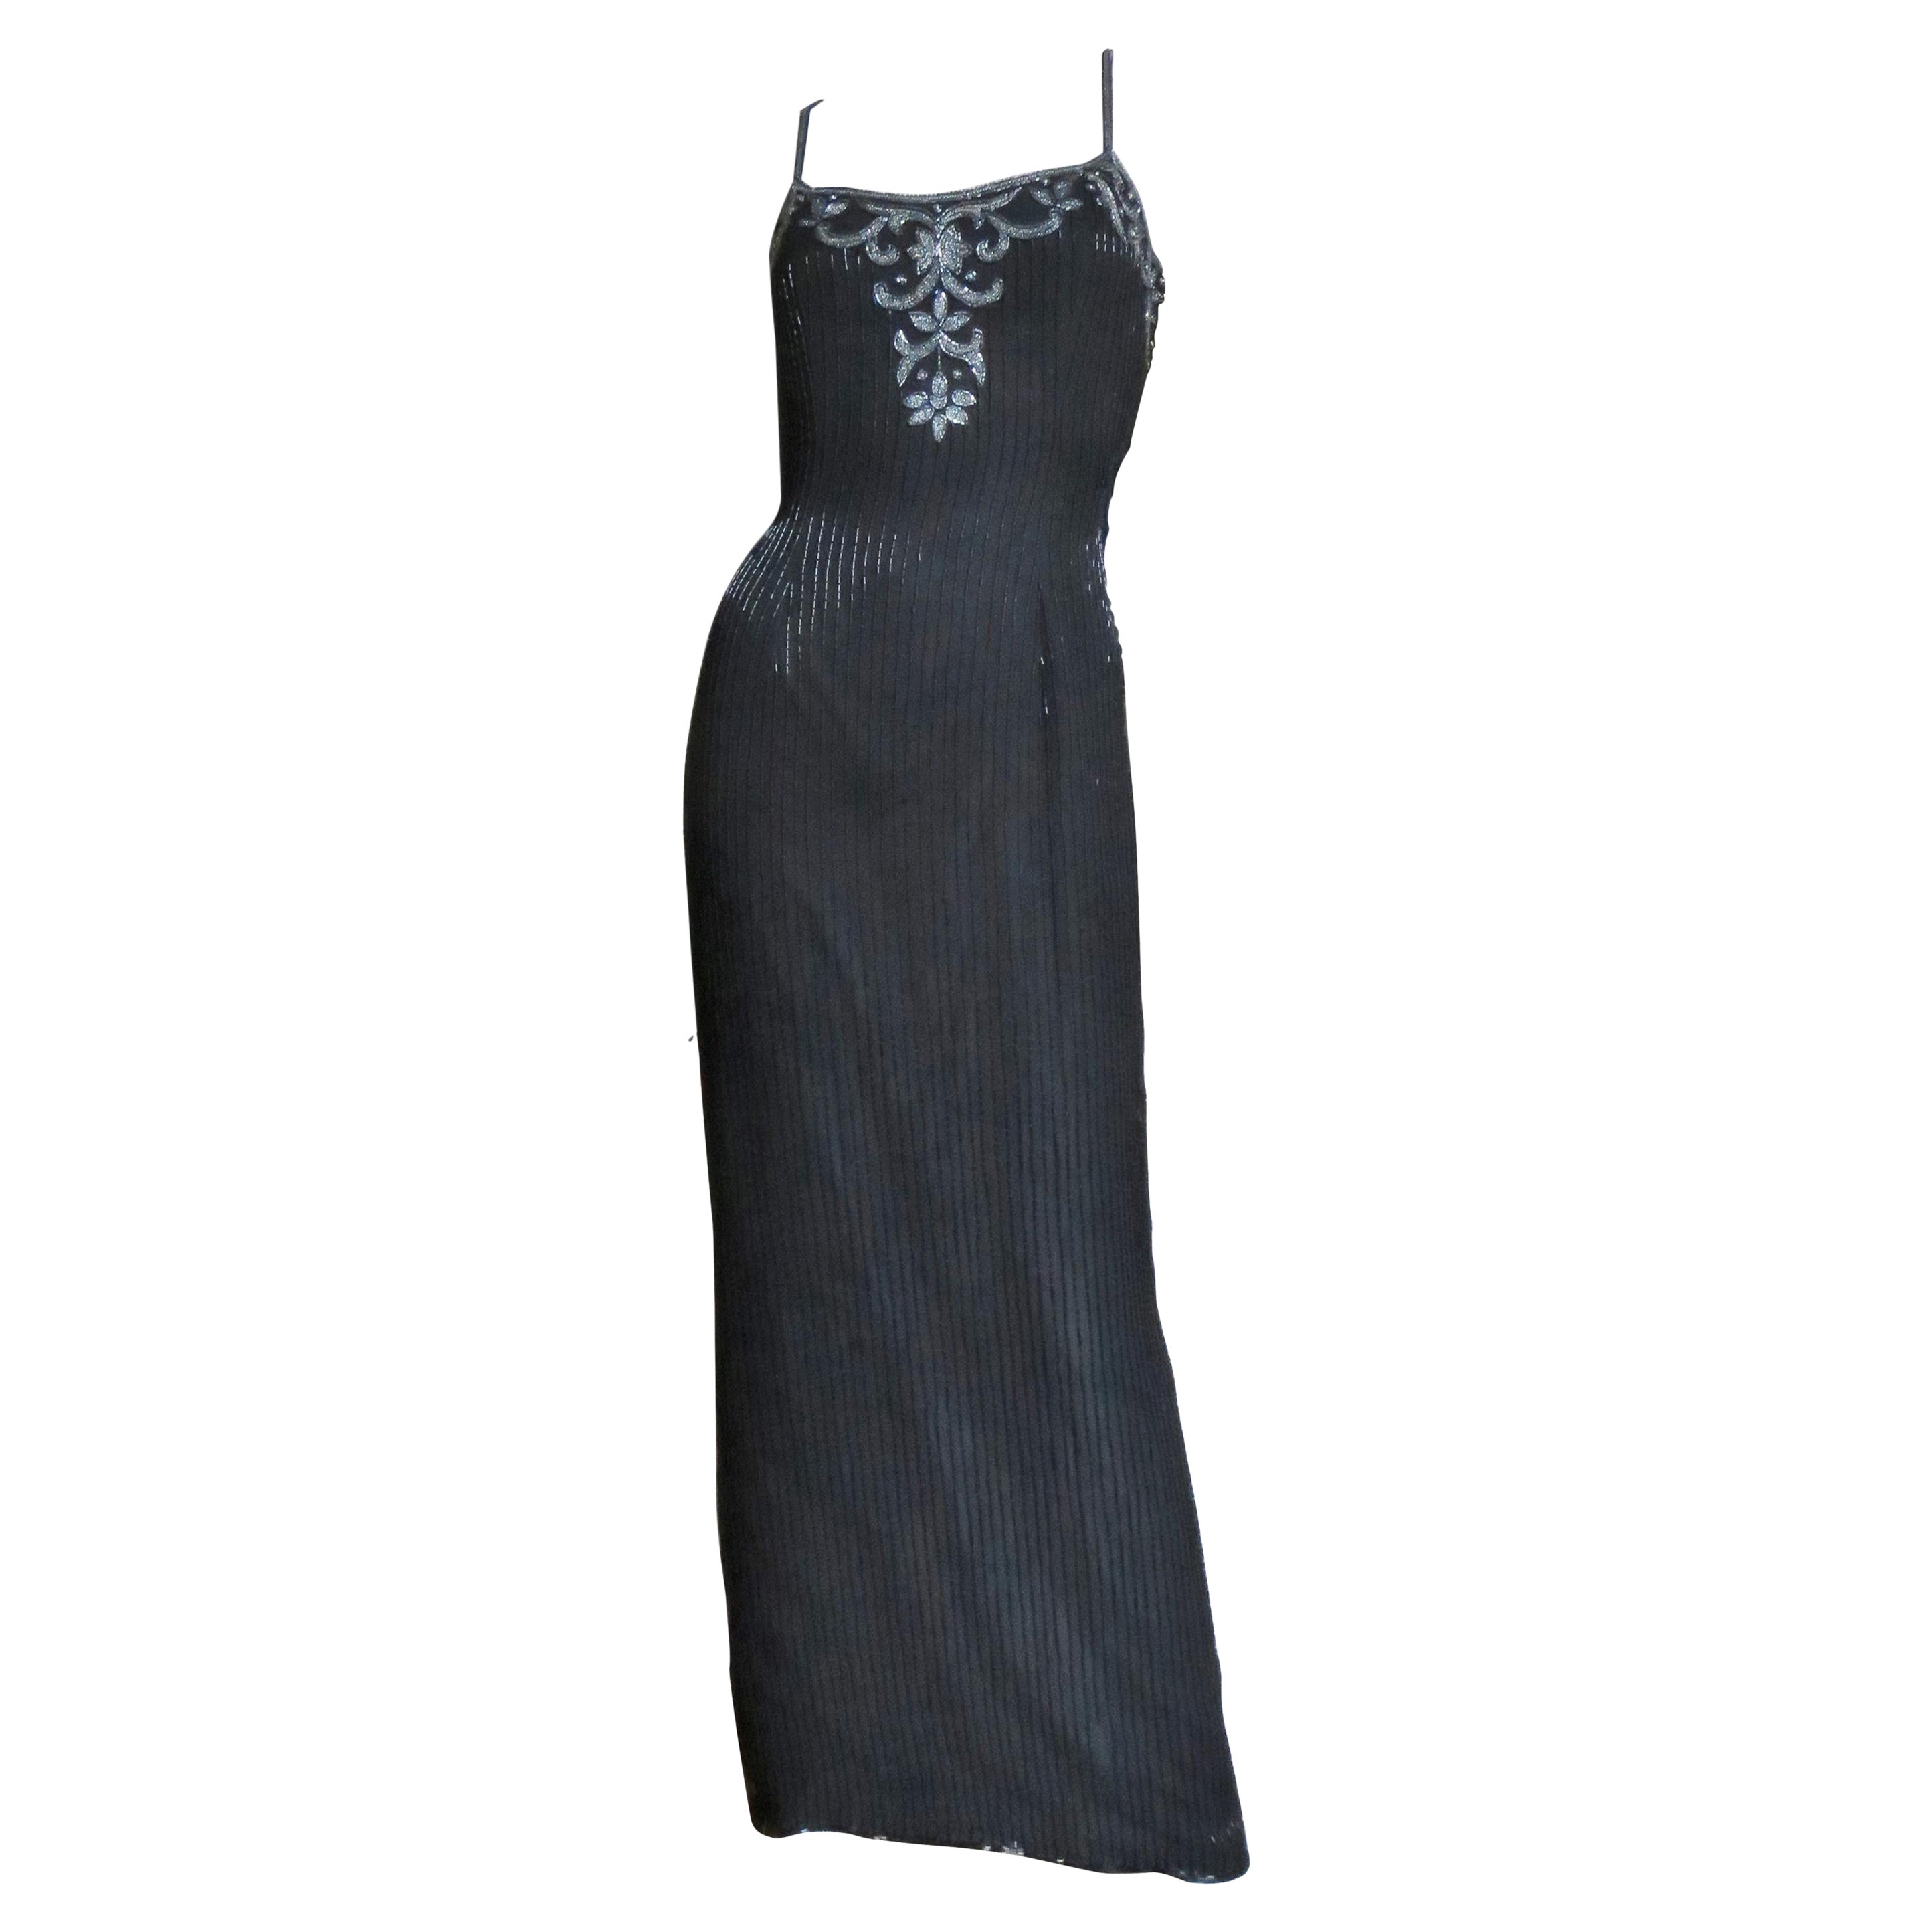 Sonia Rykiel Silk Beaded Gown with Elaborate Sheer Back 1990s For Sale